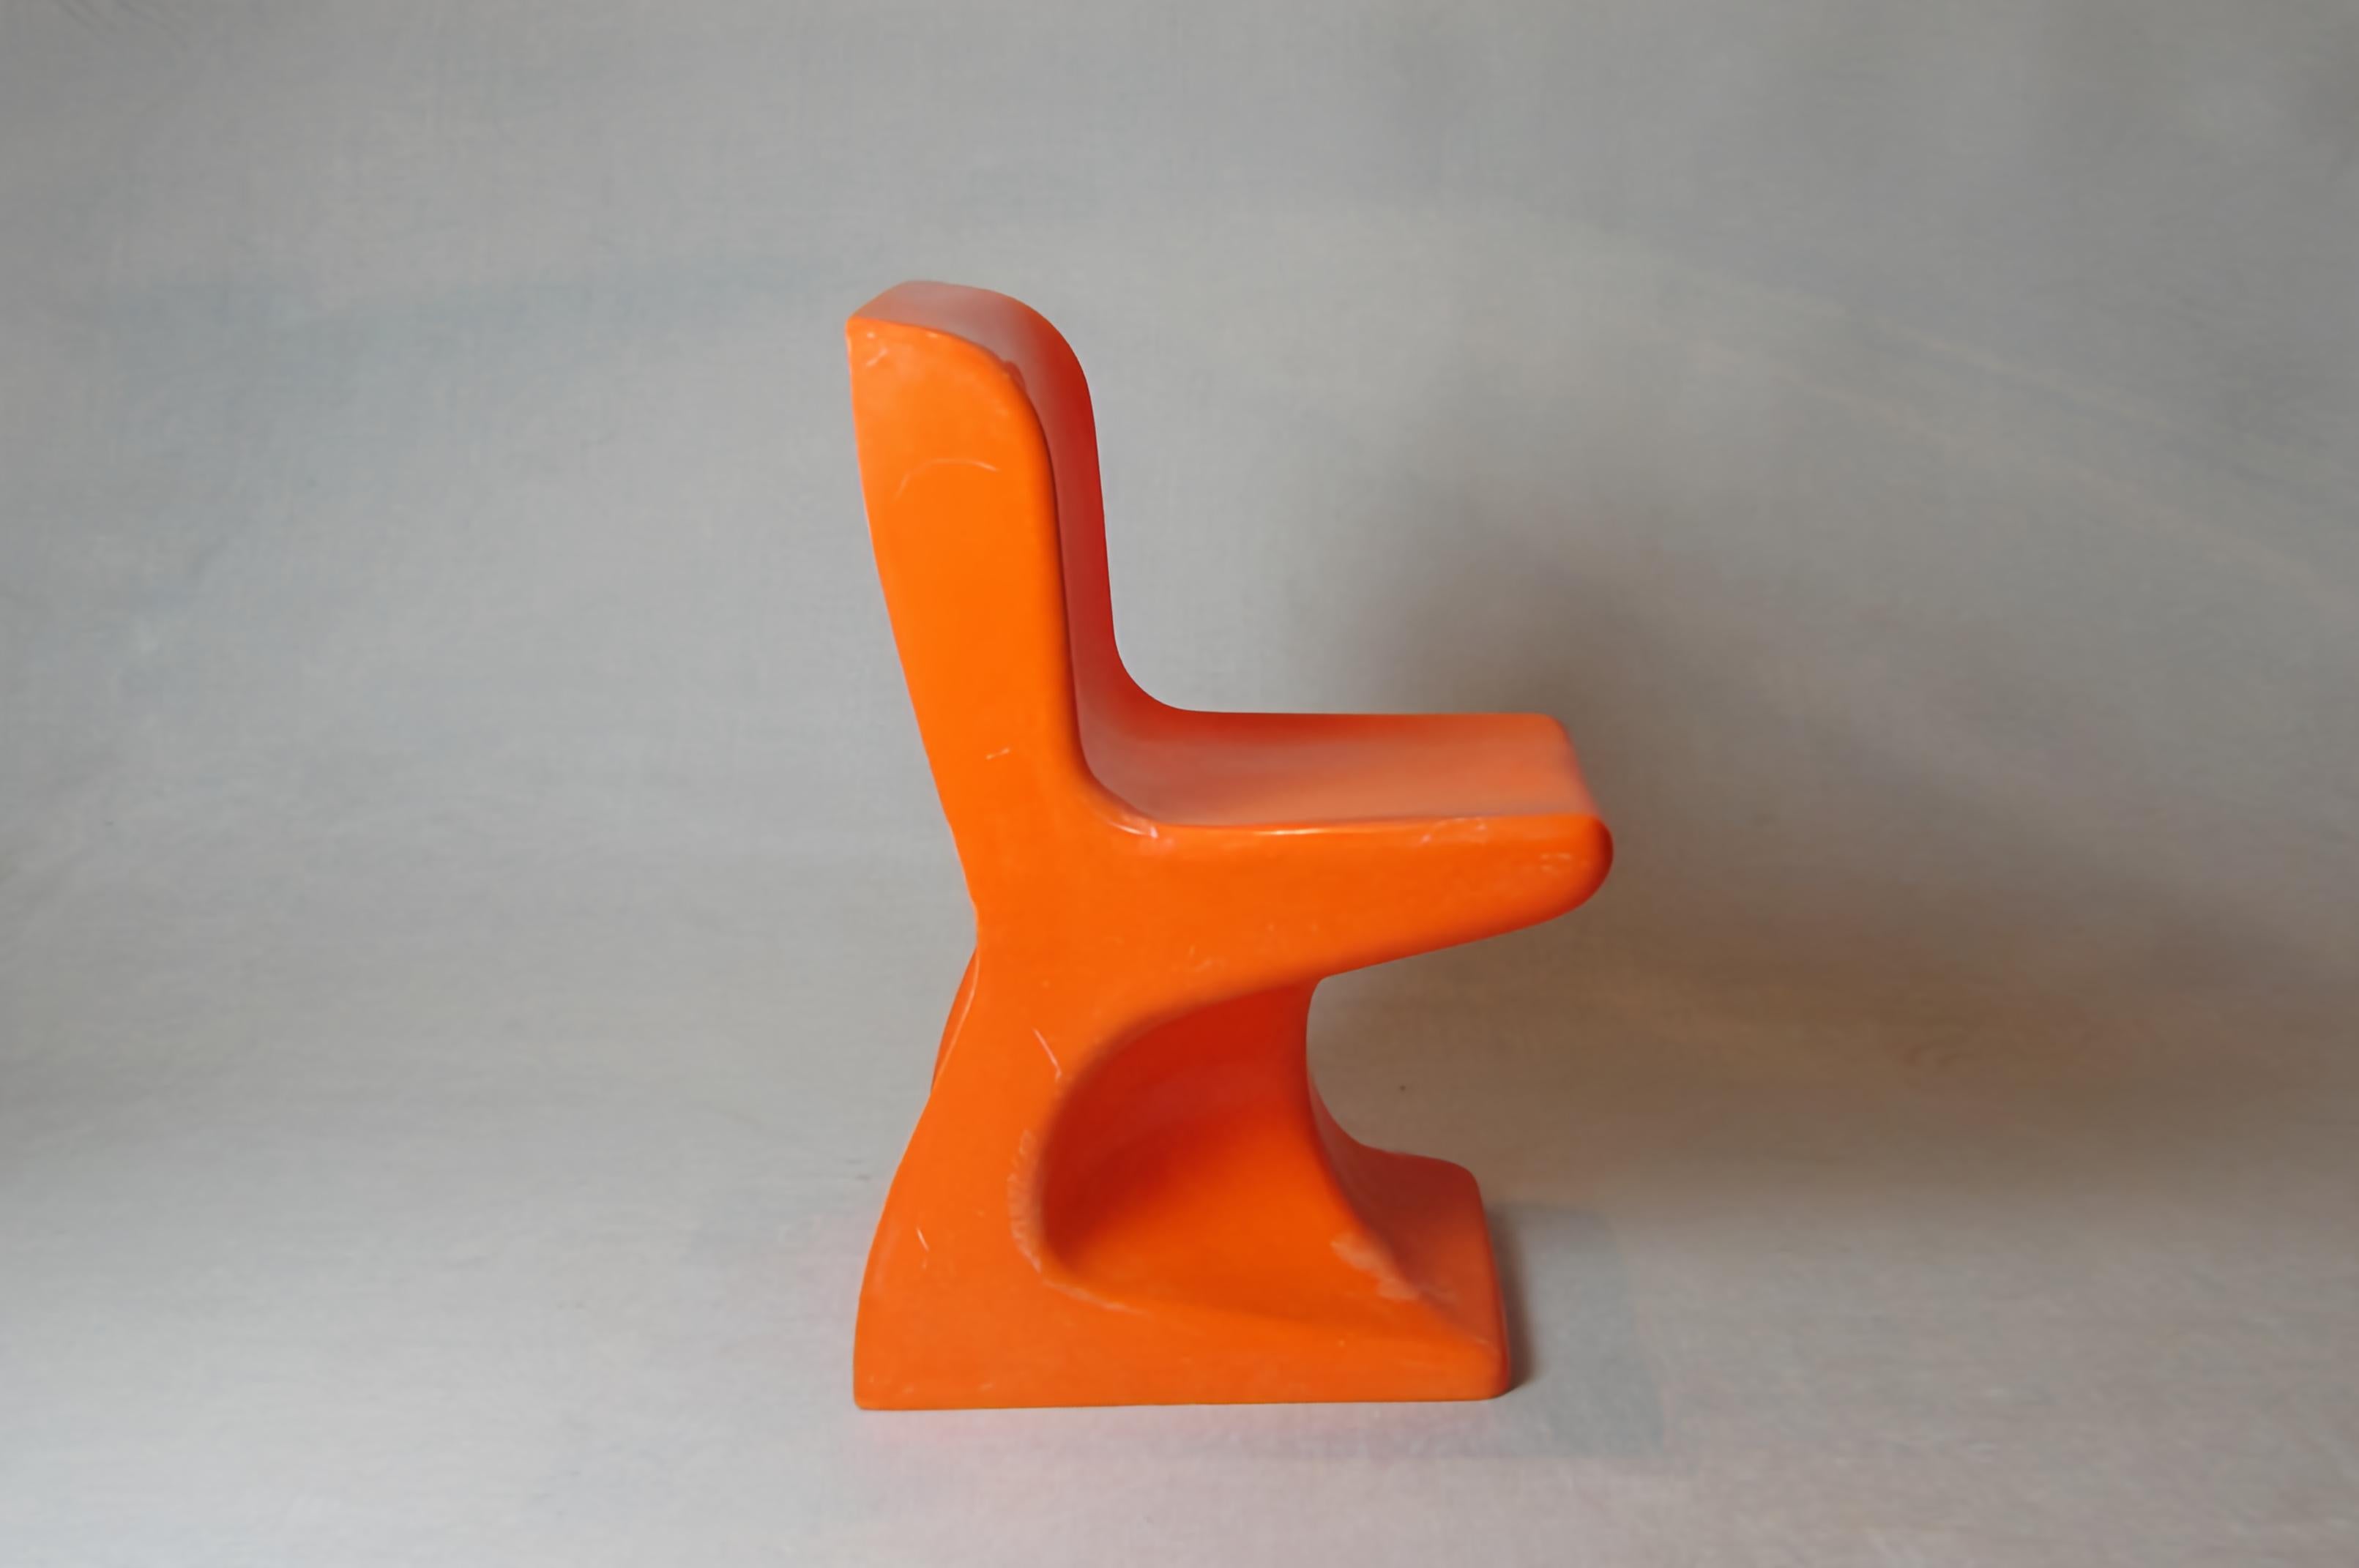 Children's stackable chair designed by Patrick Gingembre for S.E.L.A.P, France 1970. They are made of orange molded plastic with an organic shape that is very characteristic of the Pop and 